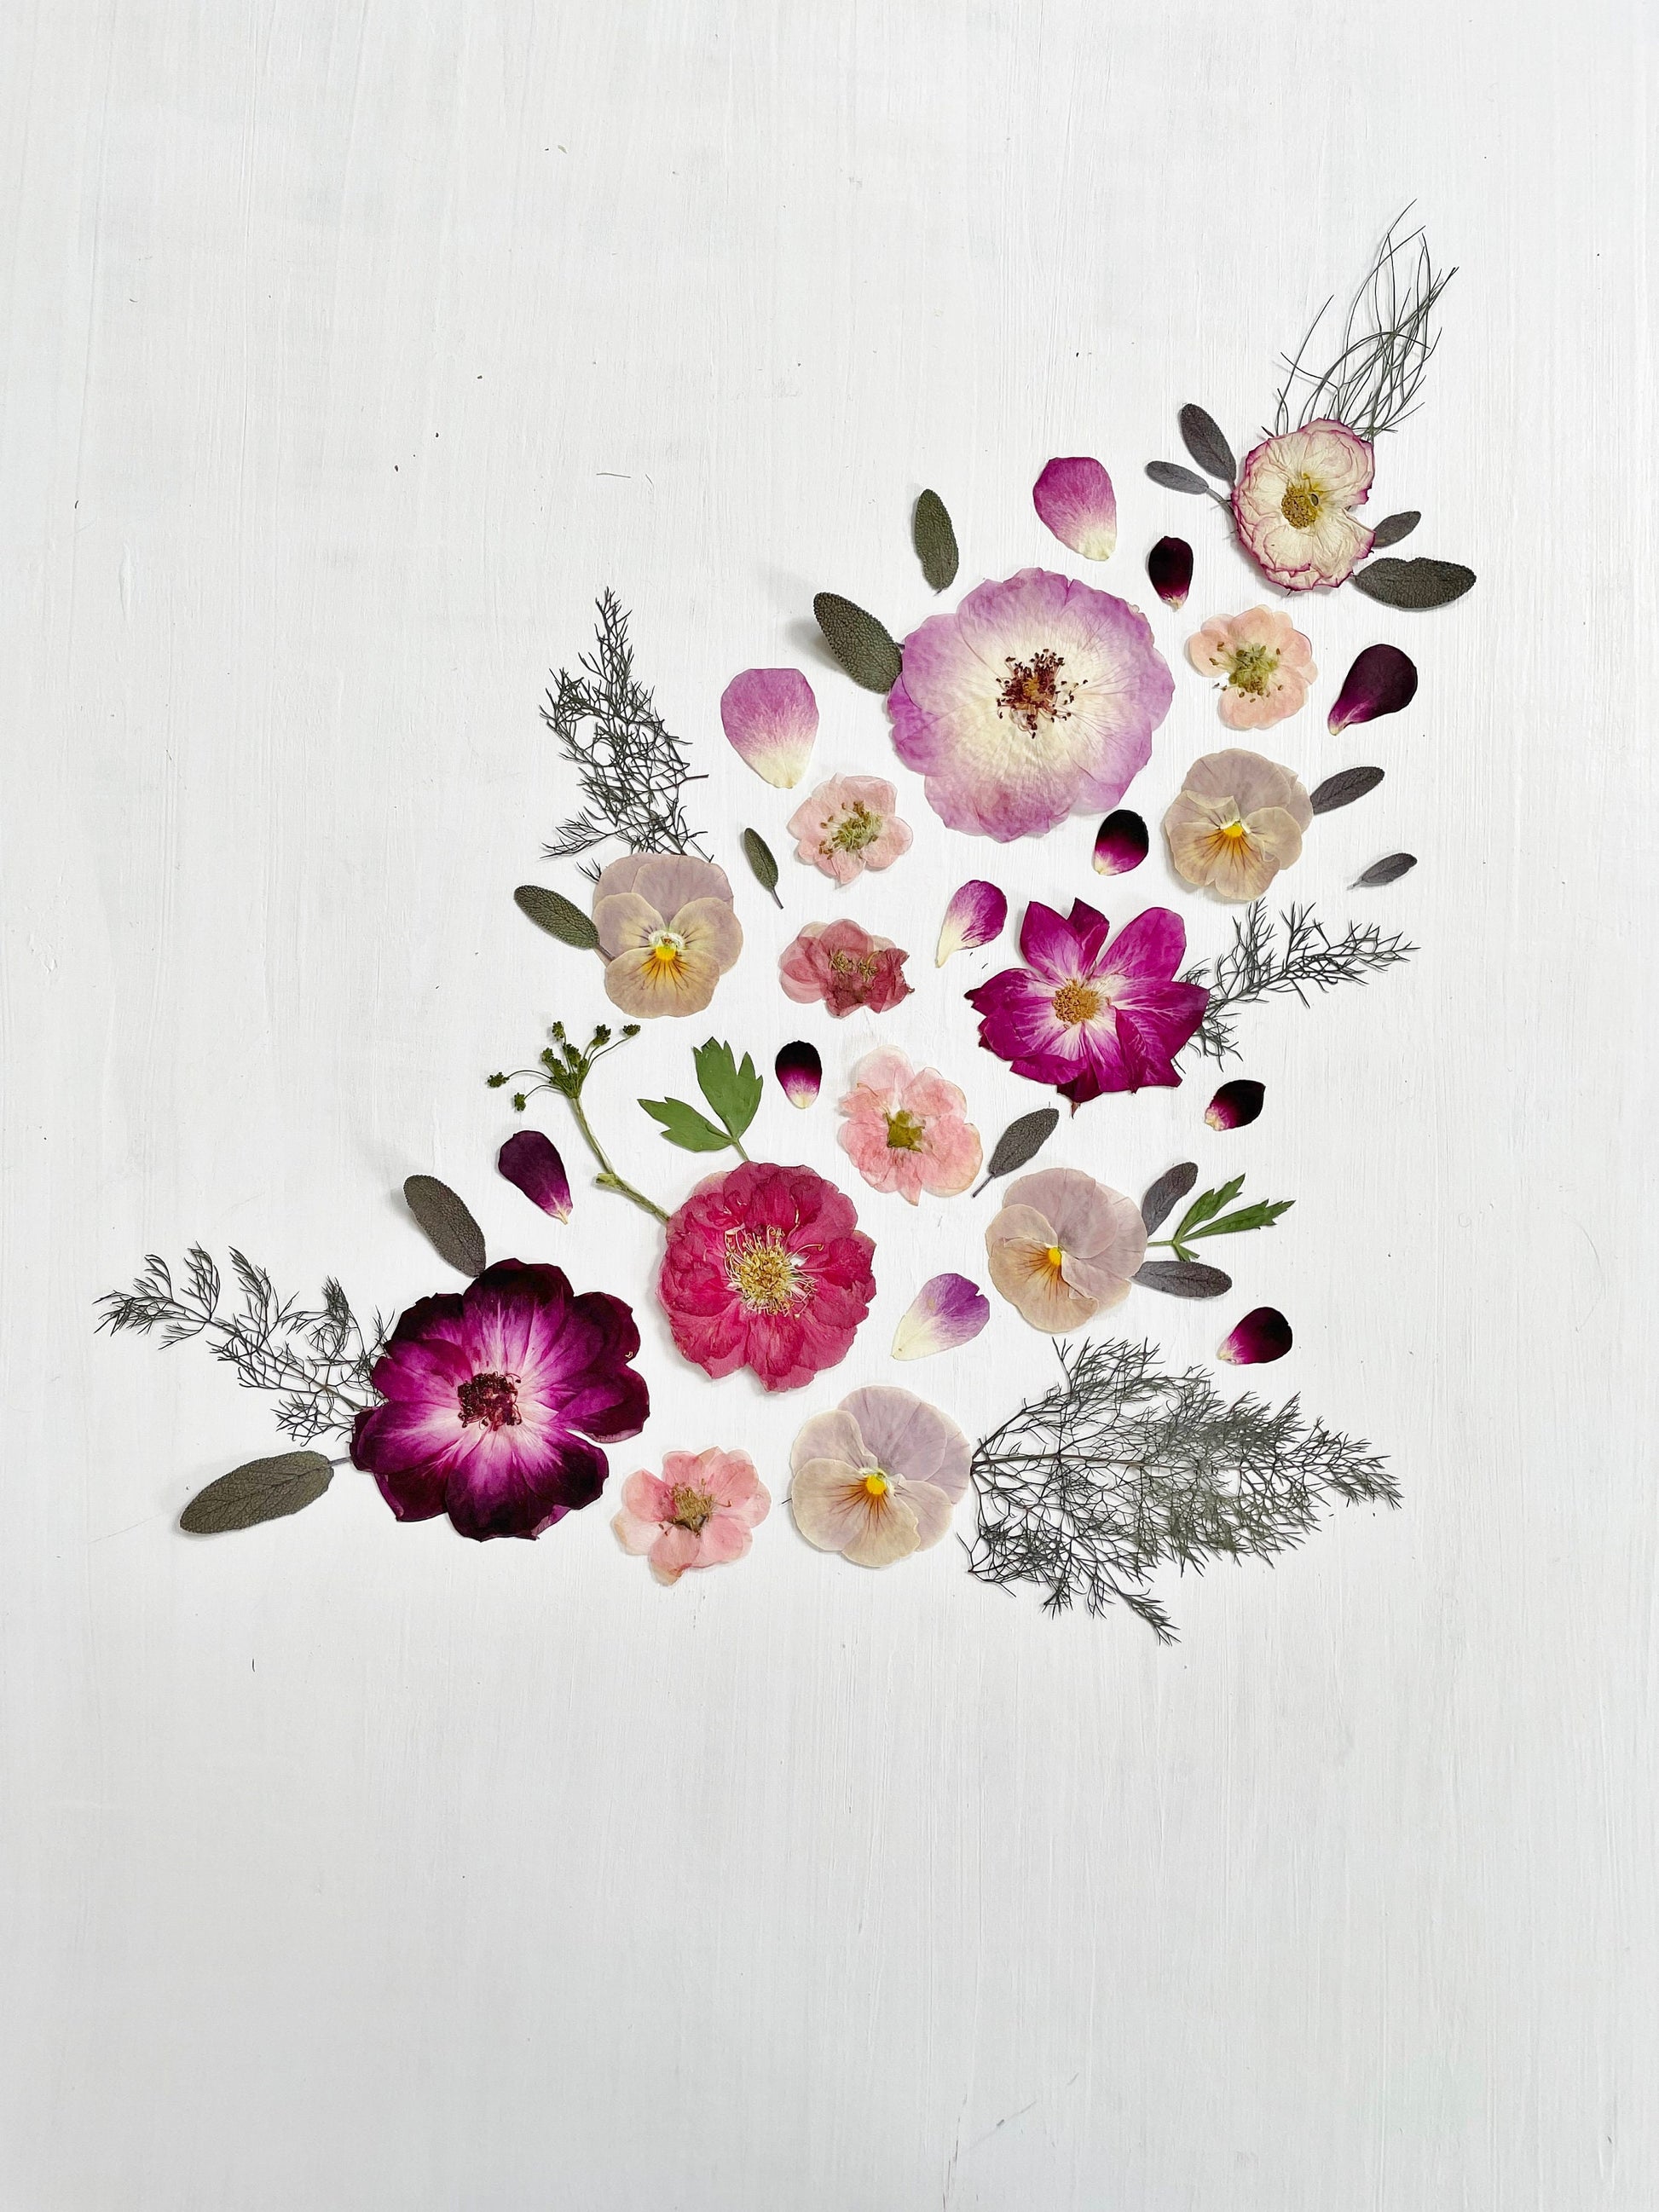 Pressed Flower Art Pictures - So Easy With Beautiful Results